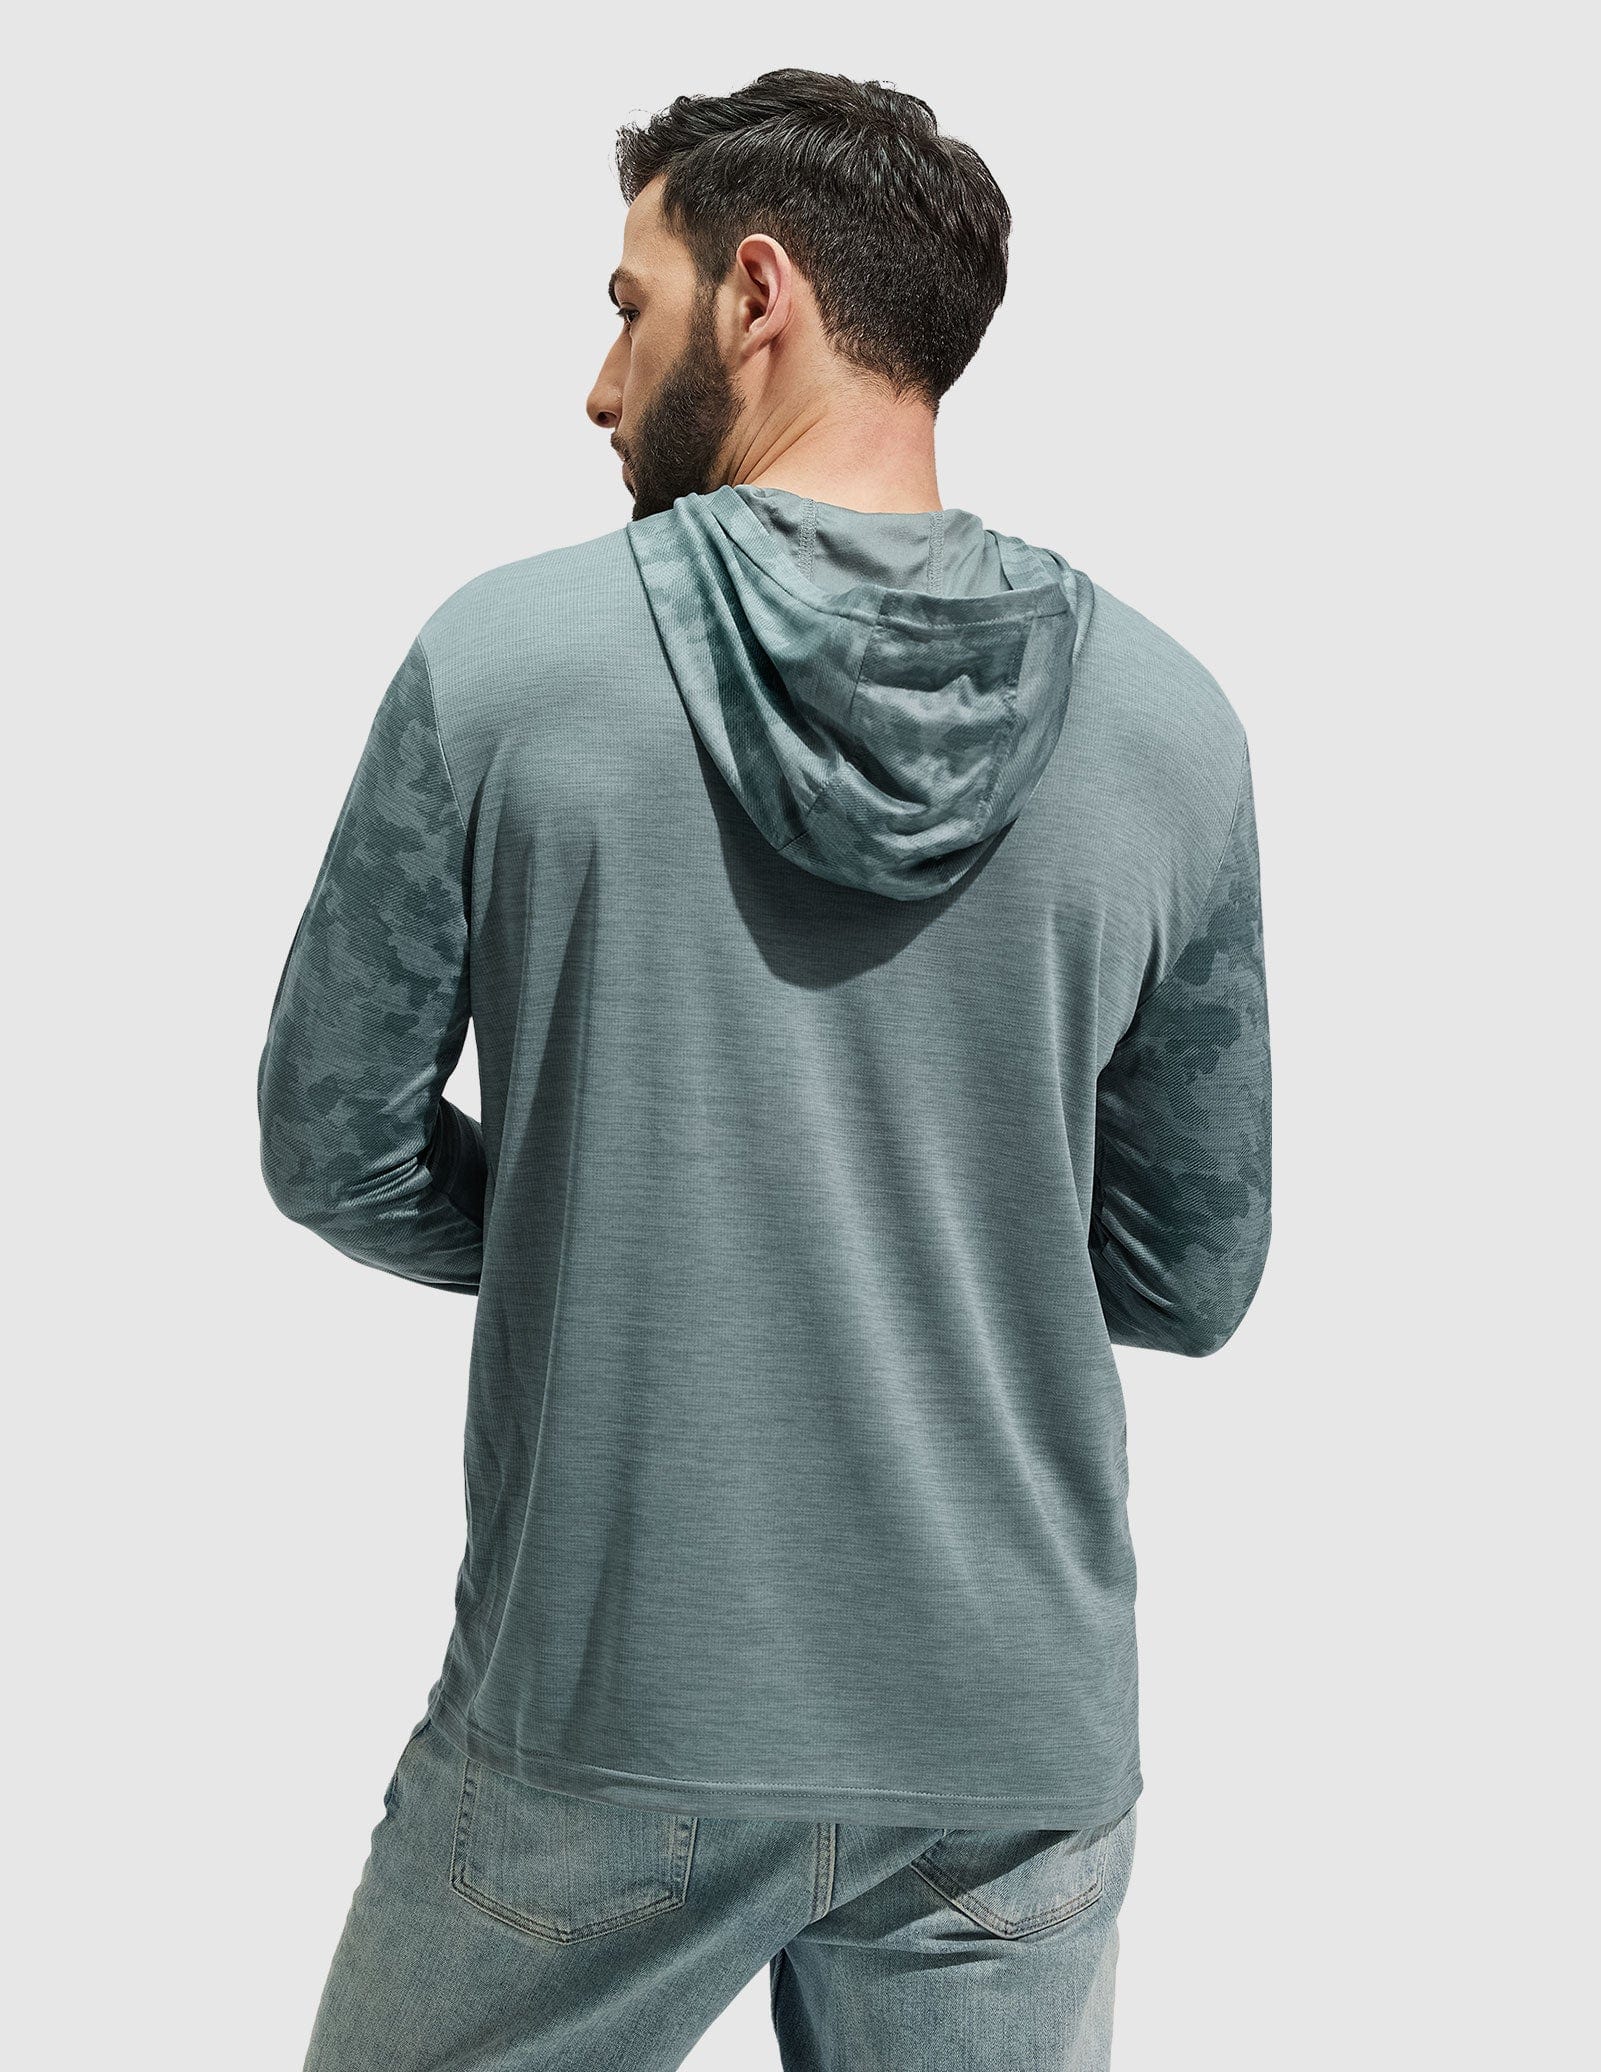 Men's UPF 50+ Sun Protection Hoodie SPF Shirts with Thumbhole Men Shirts MIER